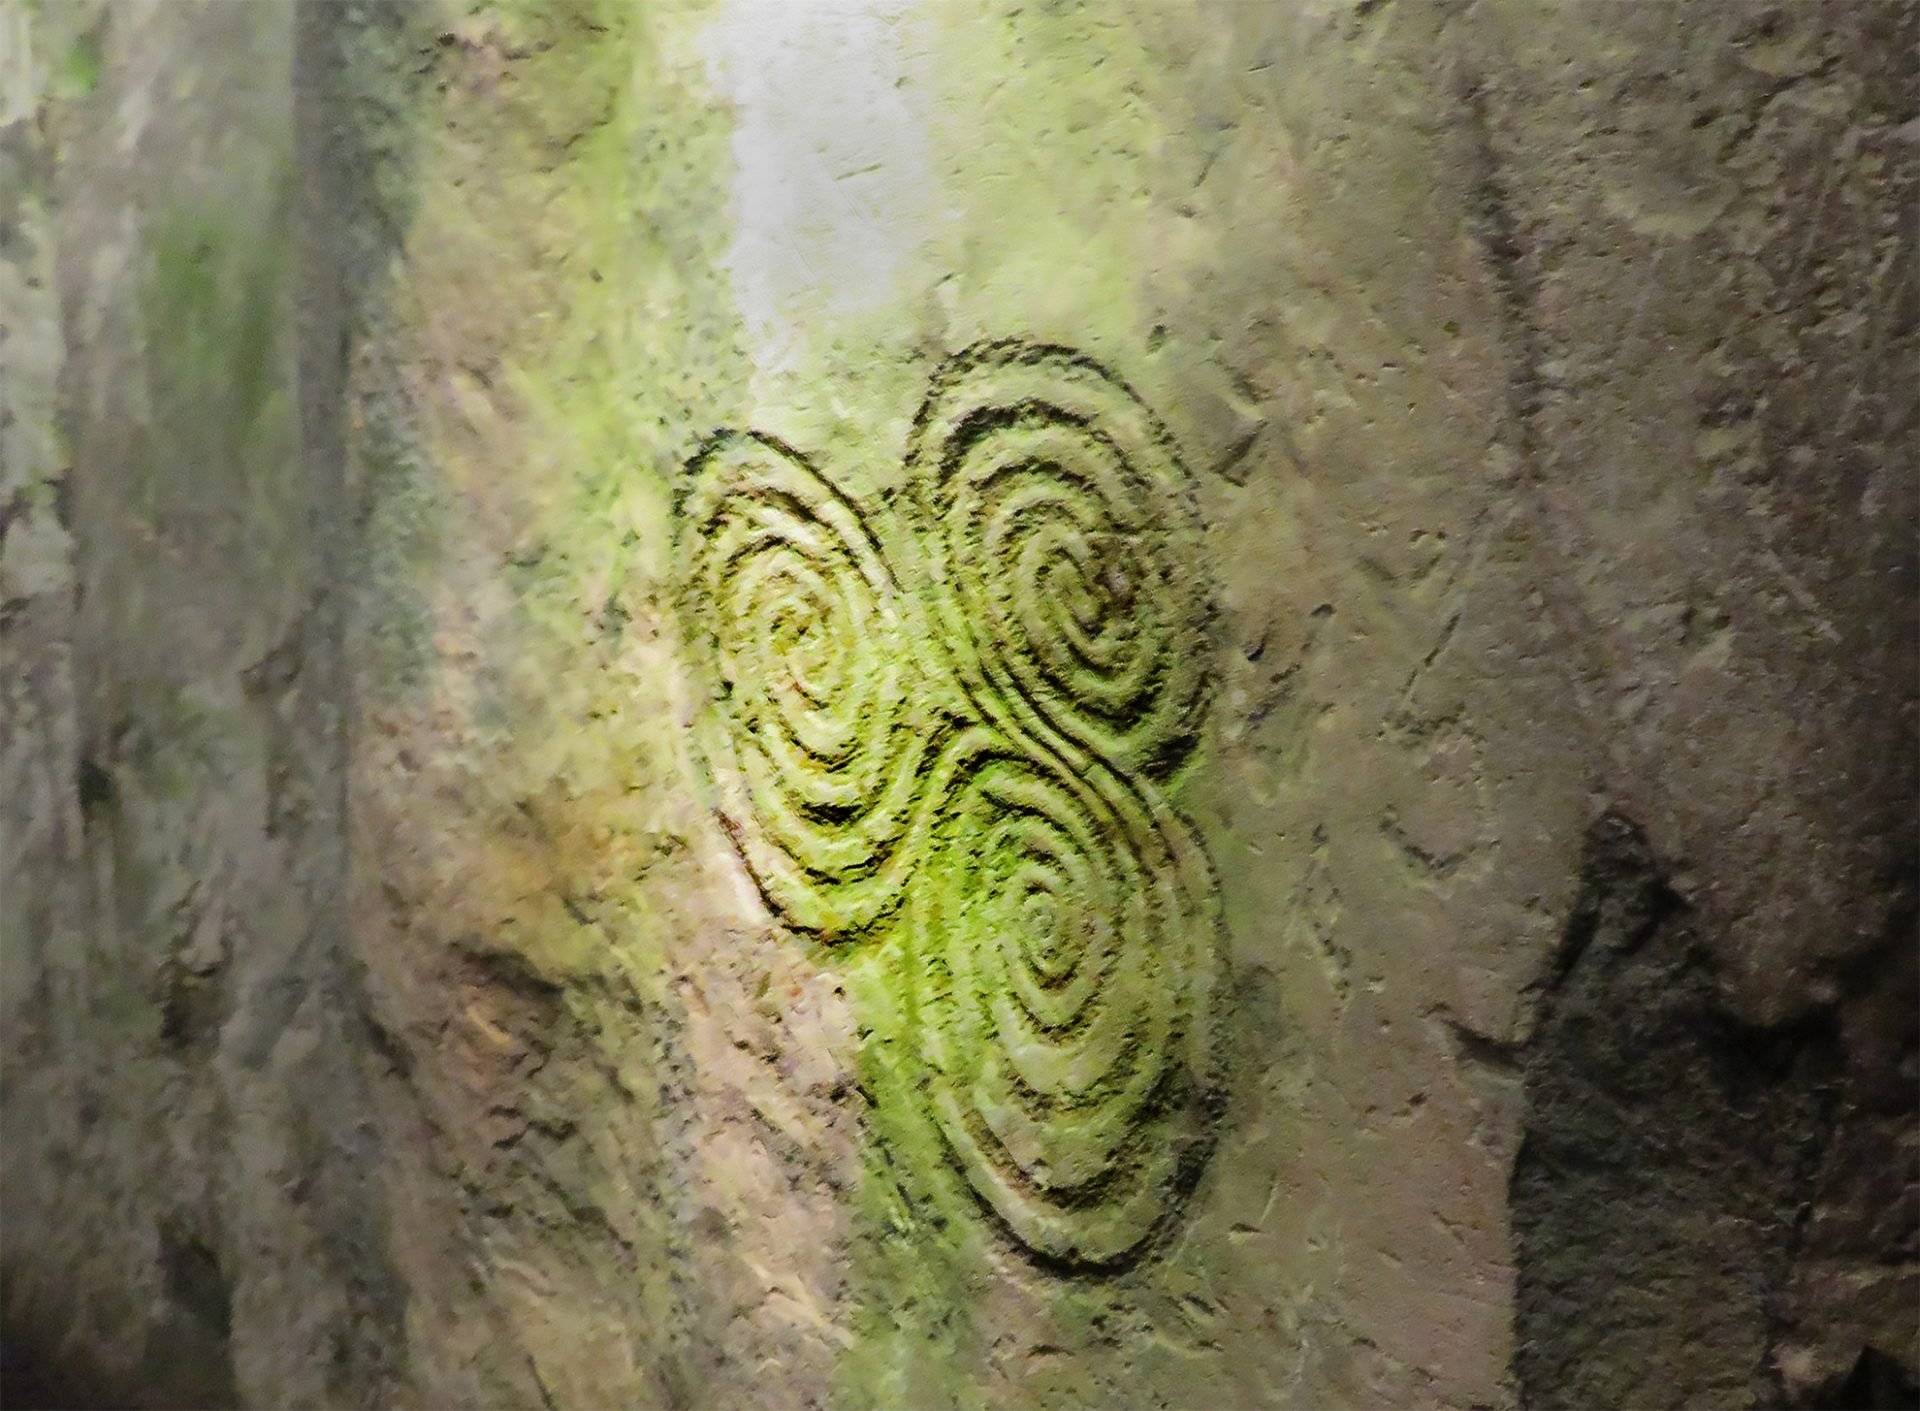 The triskele, a triple spiral motif carved into the stone wall of the inner chamber of the Newgrange passage tomb in Ireland, symbolizing a concept associated with Druidic beliefs.